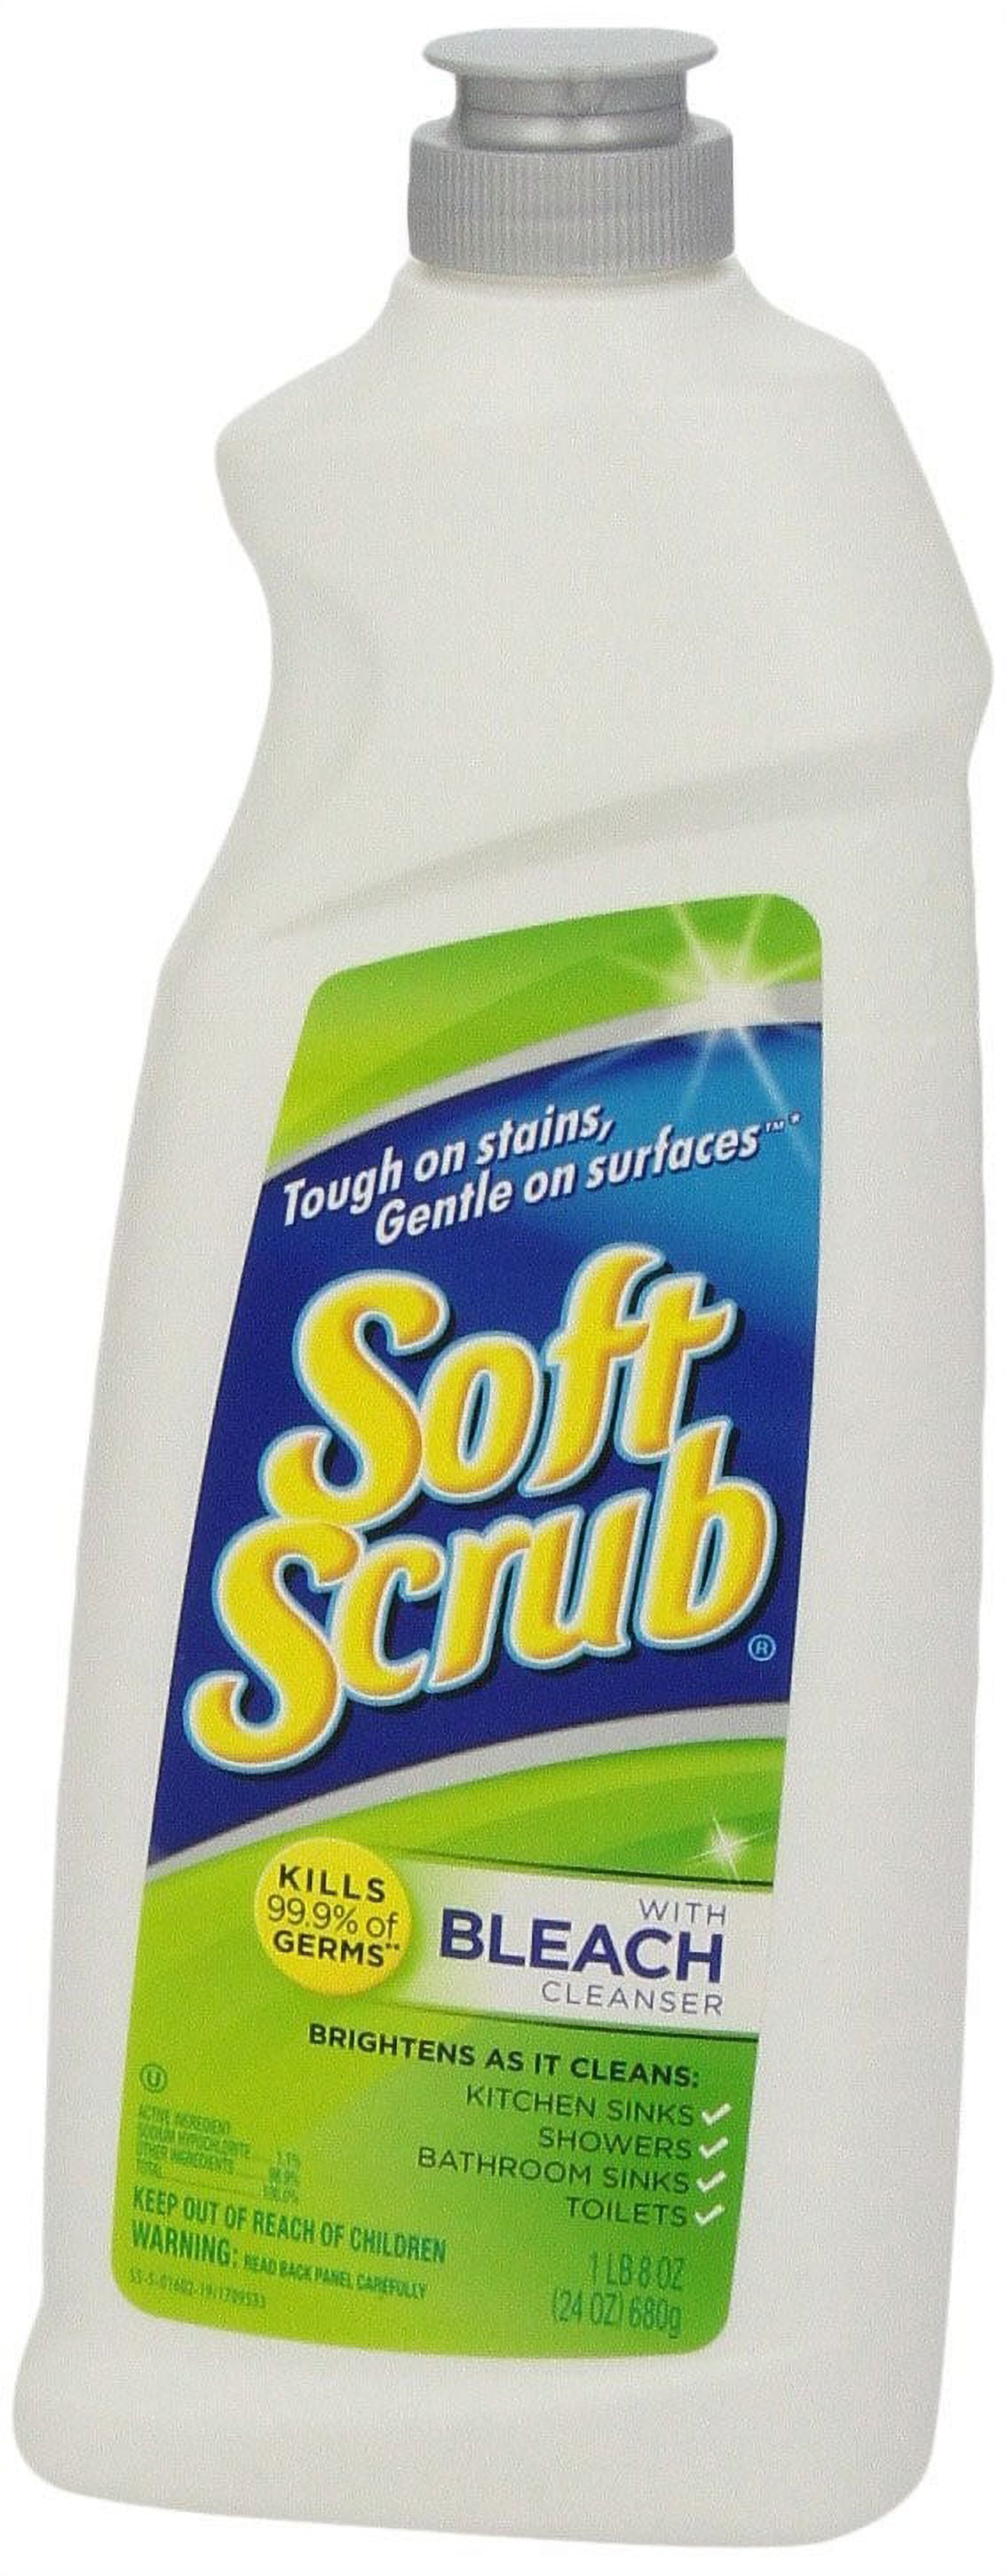 Soft Scrub® Cleanser with Bleach at it again. Sometimes it's not